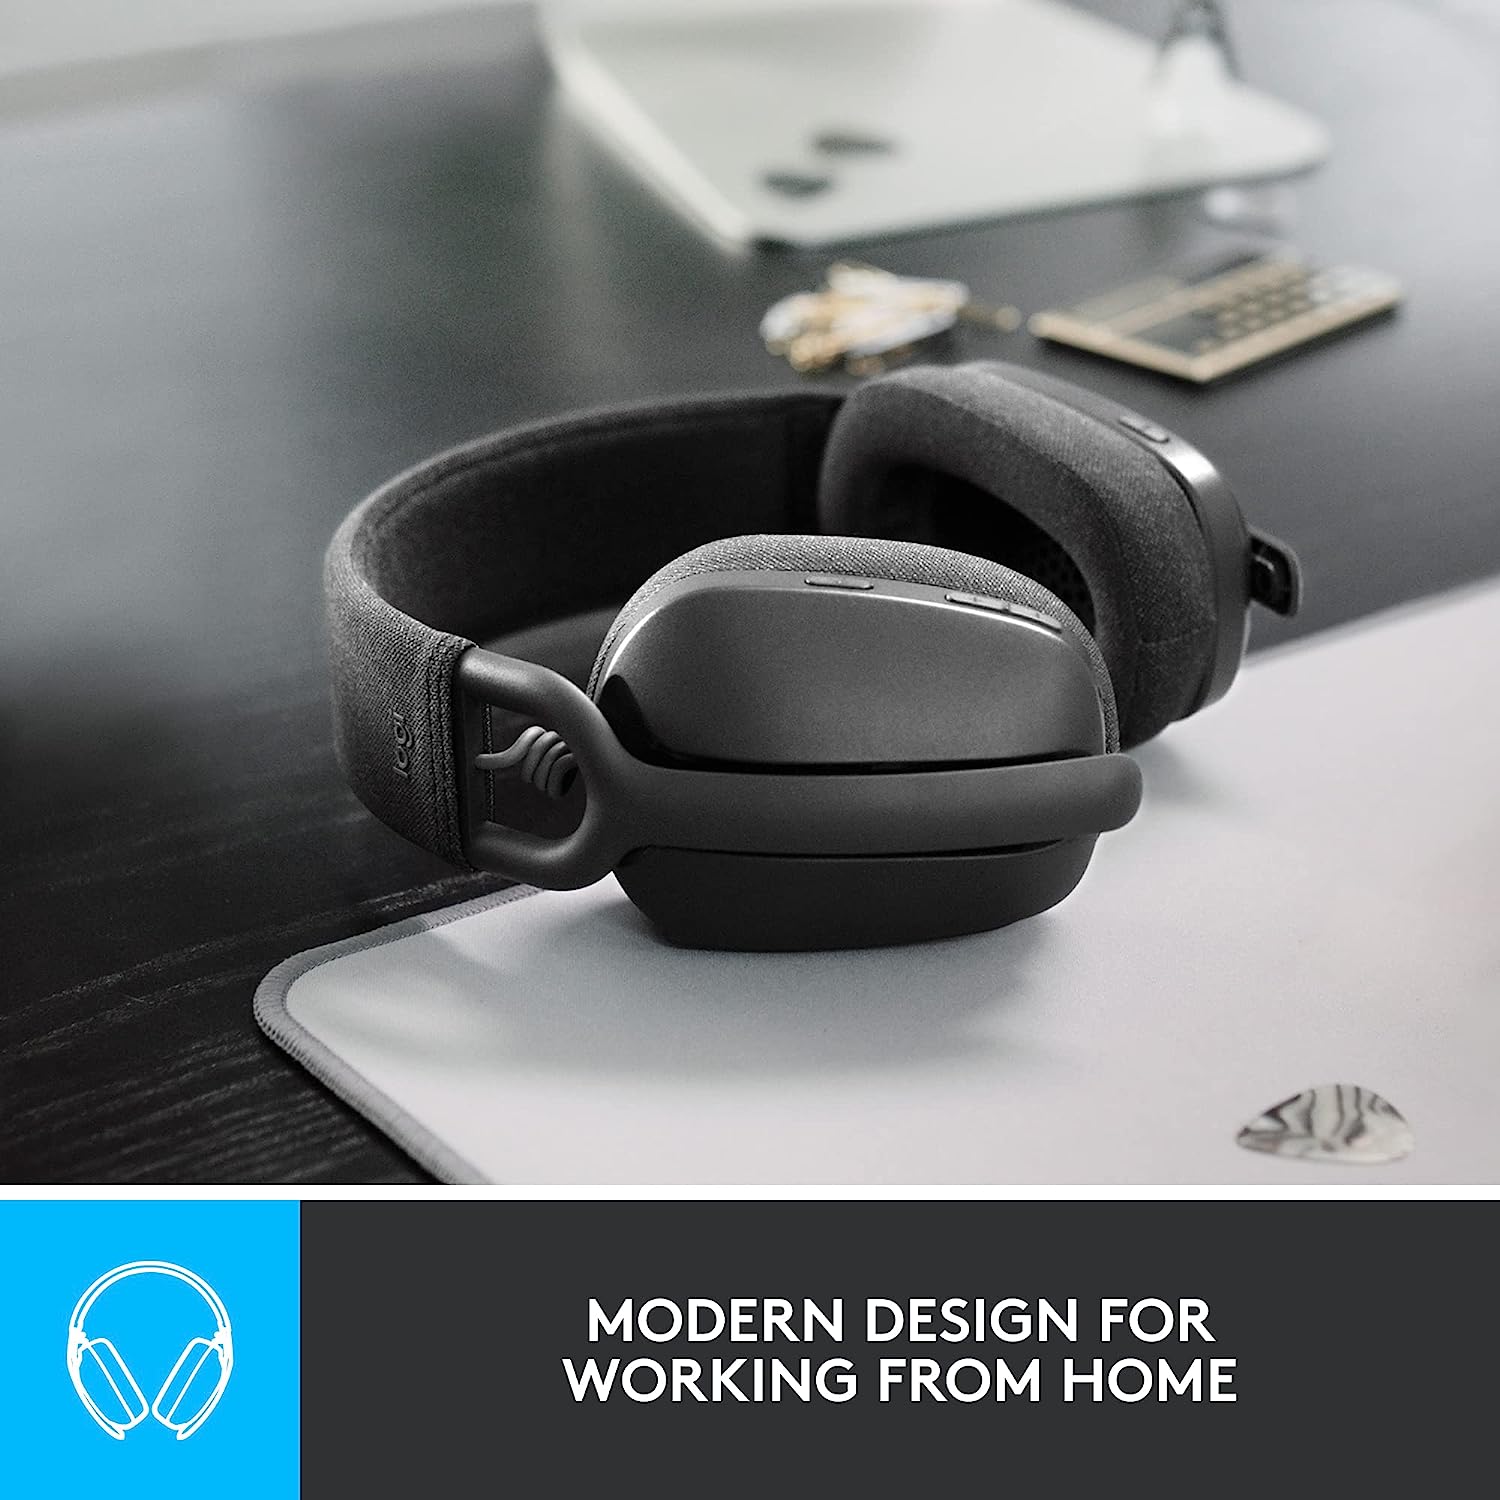 Logitech Zone Vibe 100 Lightweight Wireless Over-Ear Headphones with Noise-Cancelling Microphone, Advanced Multipoint Bluetooth Headset, Works with Teams, Google Meet, Zoom, Mac/PC - Off White